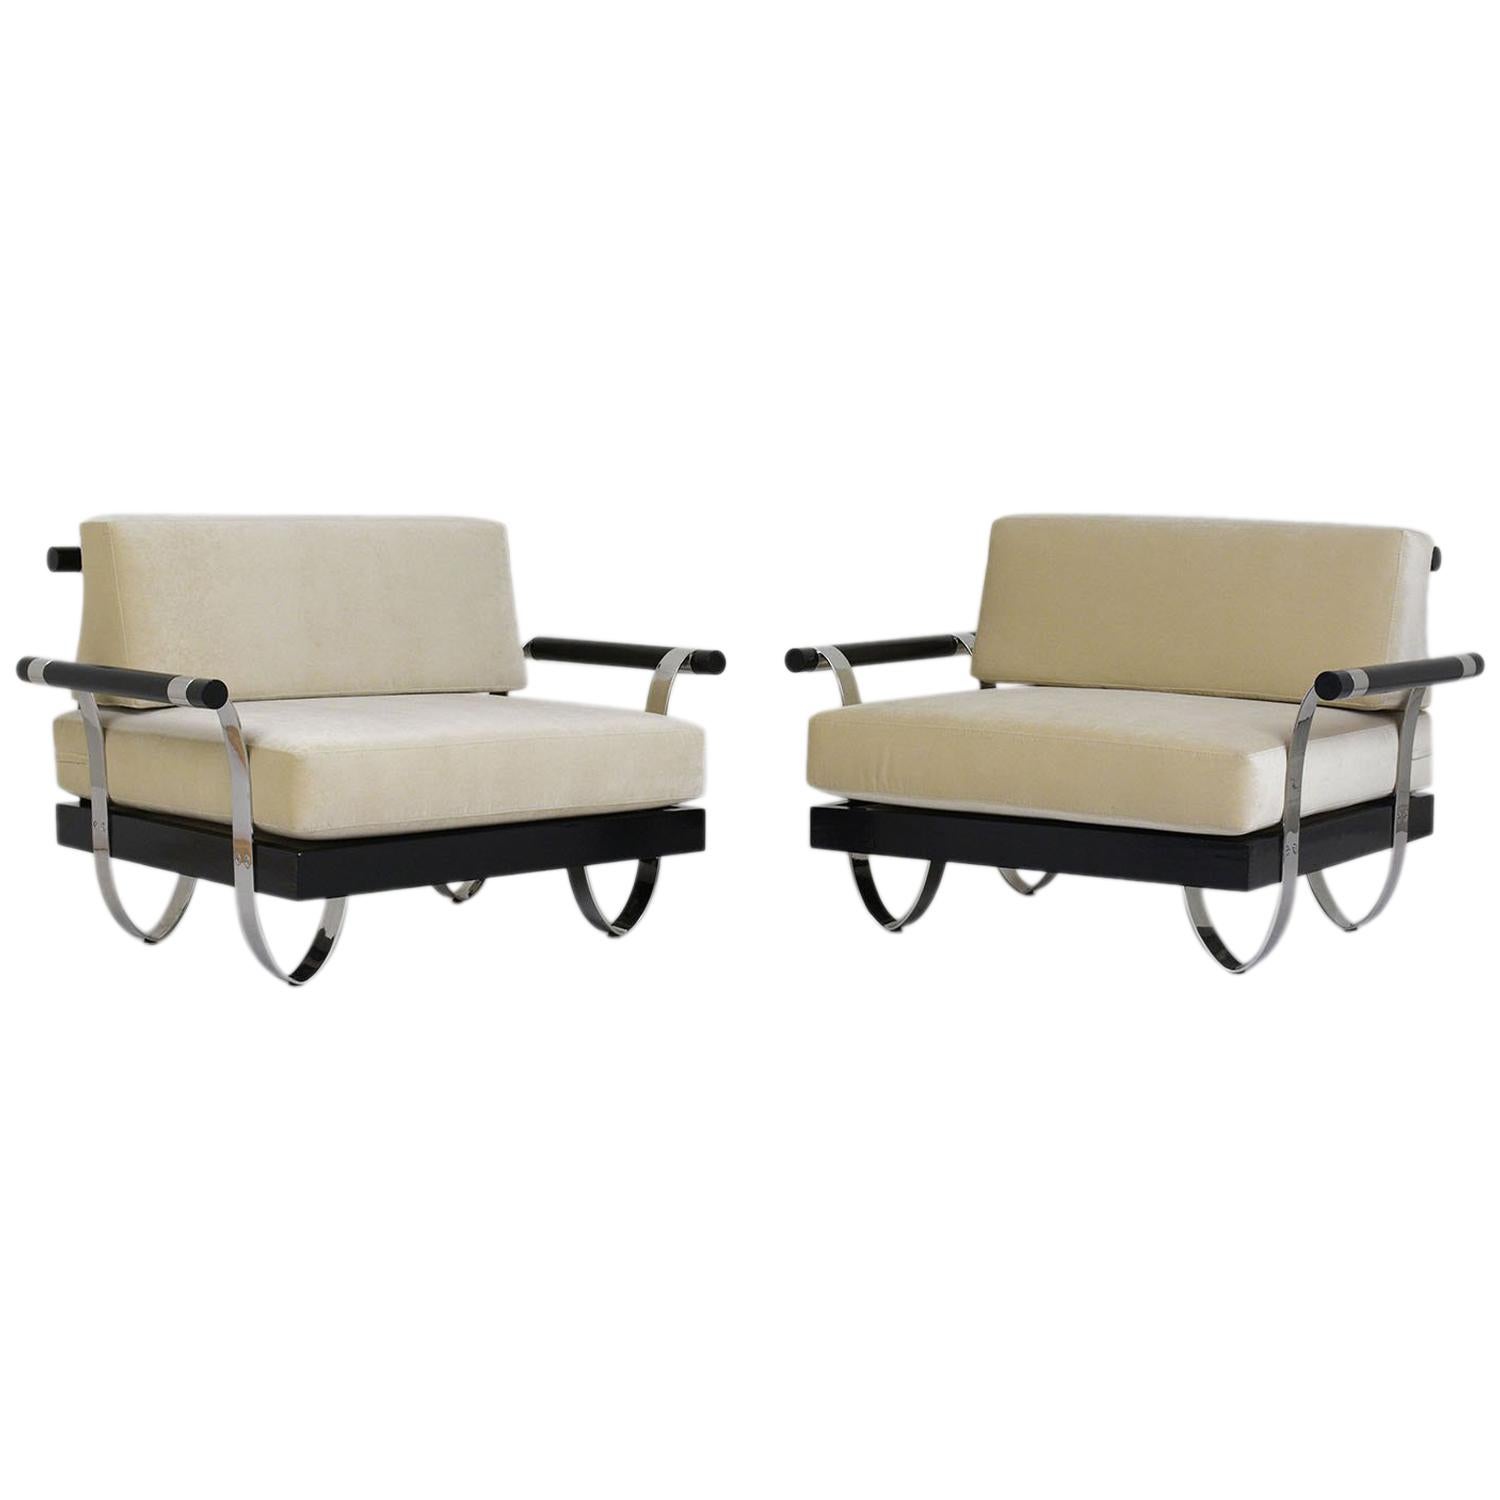 Pair of Mid-Century Modern Ebonized Wood and Chrome Lounge Chairs